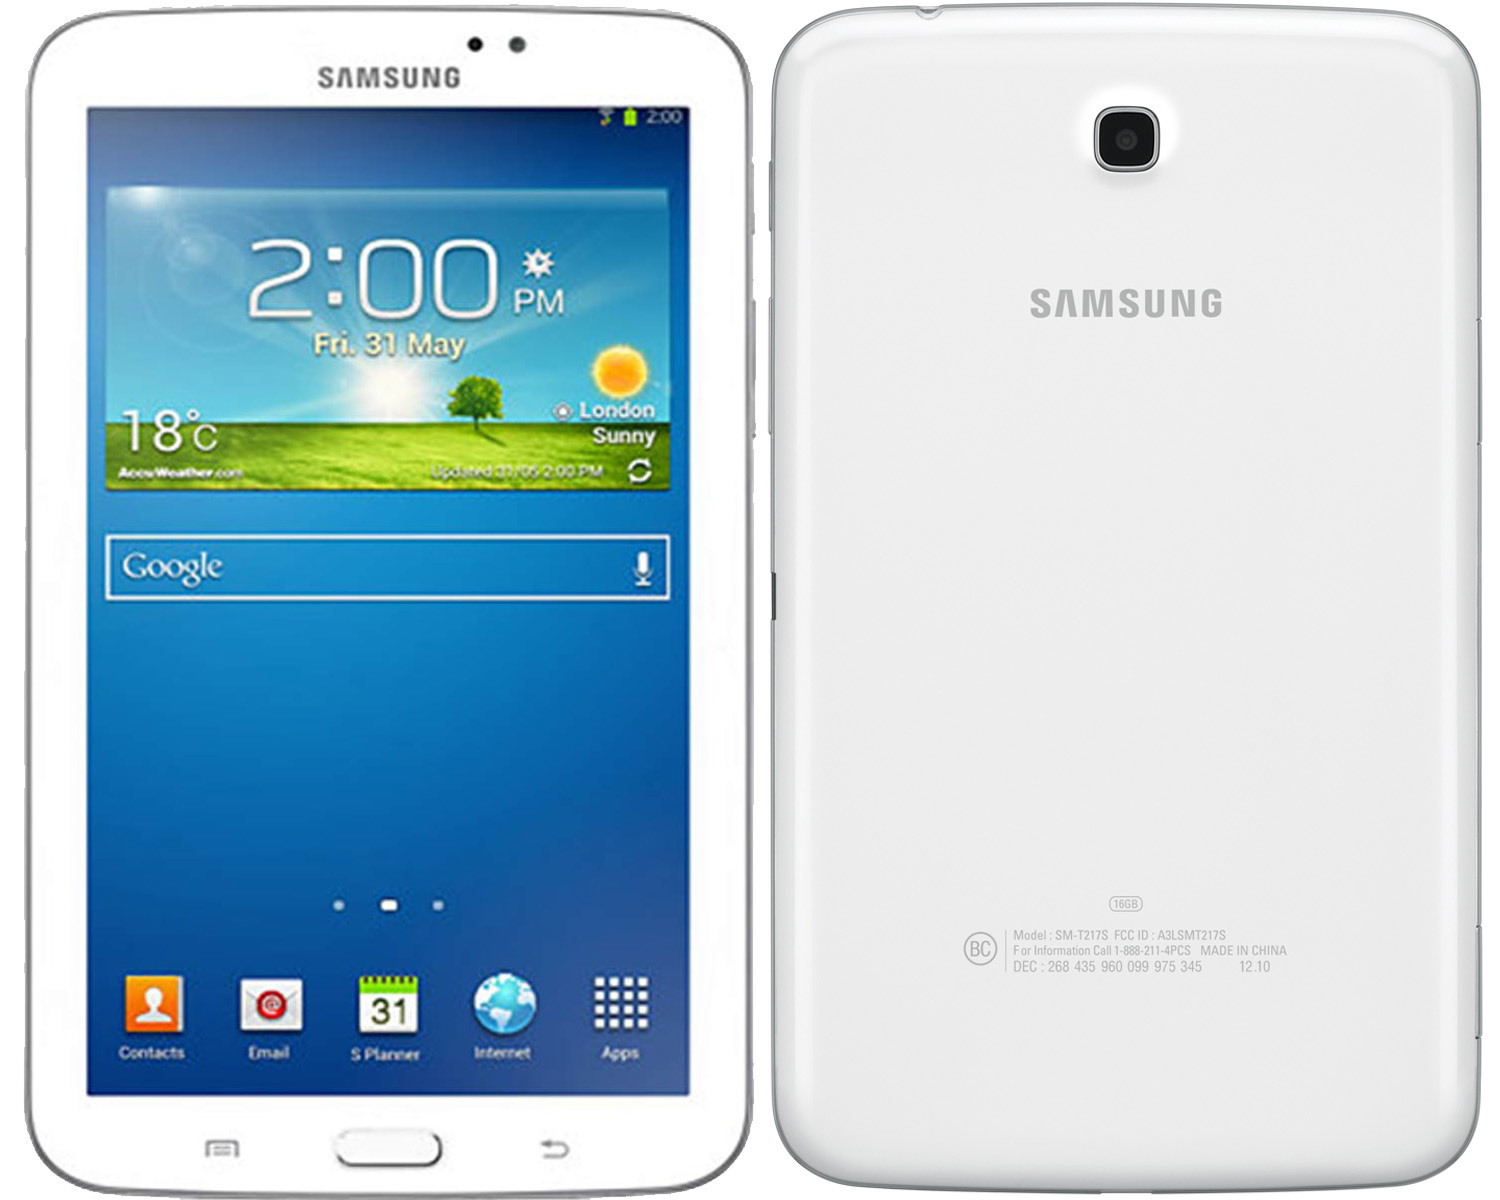 Primary image for Samsung galaxy tab 3 7.0 t211 8gb dual-core 3.15mp wife 7" android tablet white